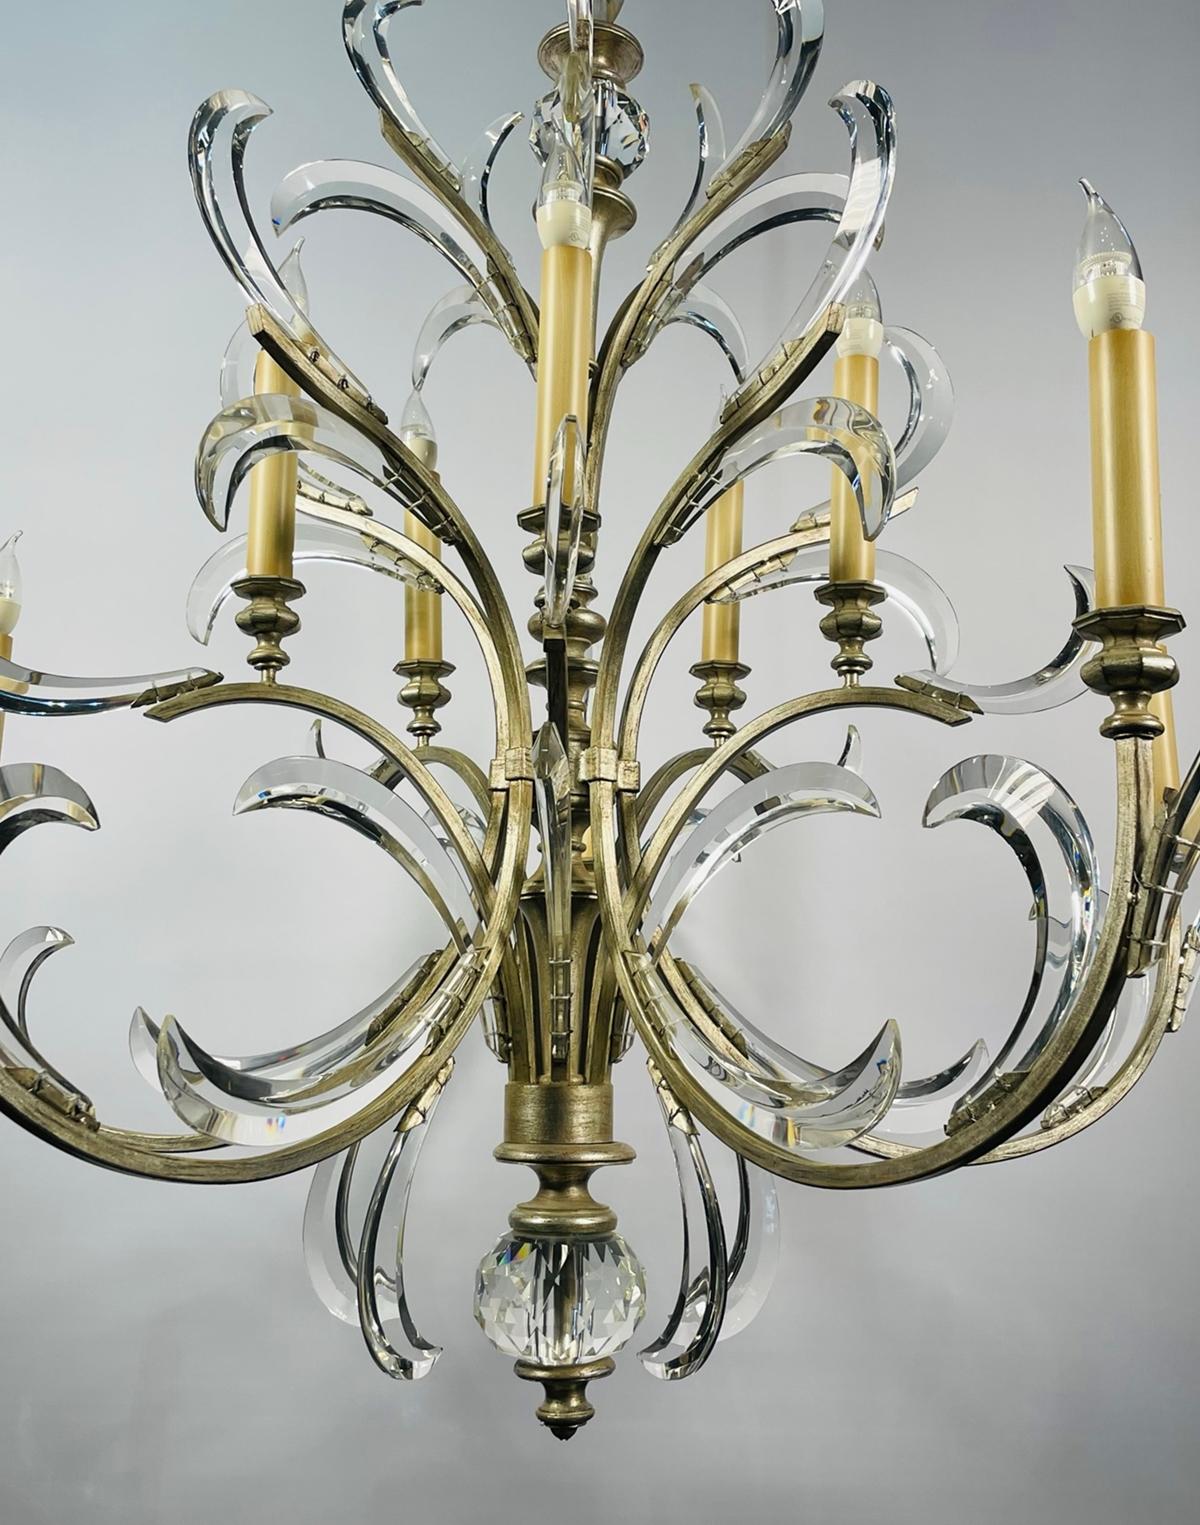 Beveled Arcs Chandelier by Fine Art Handcrafted Lighting, USA 2